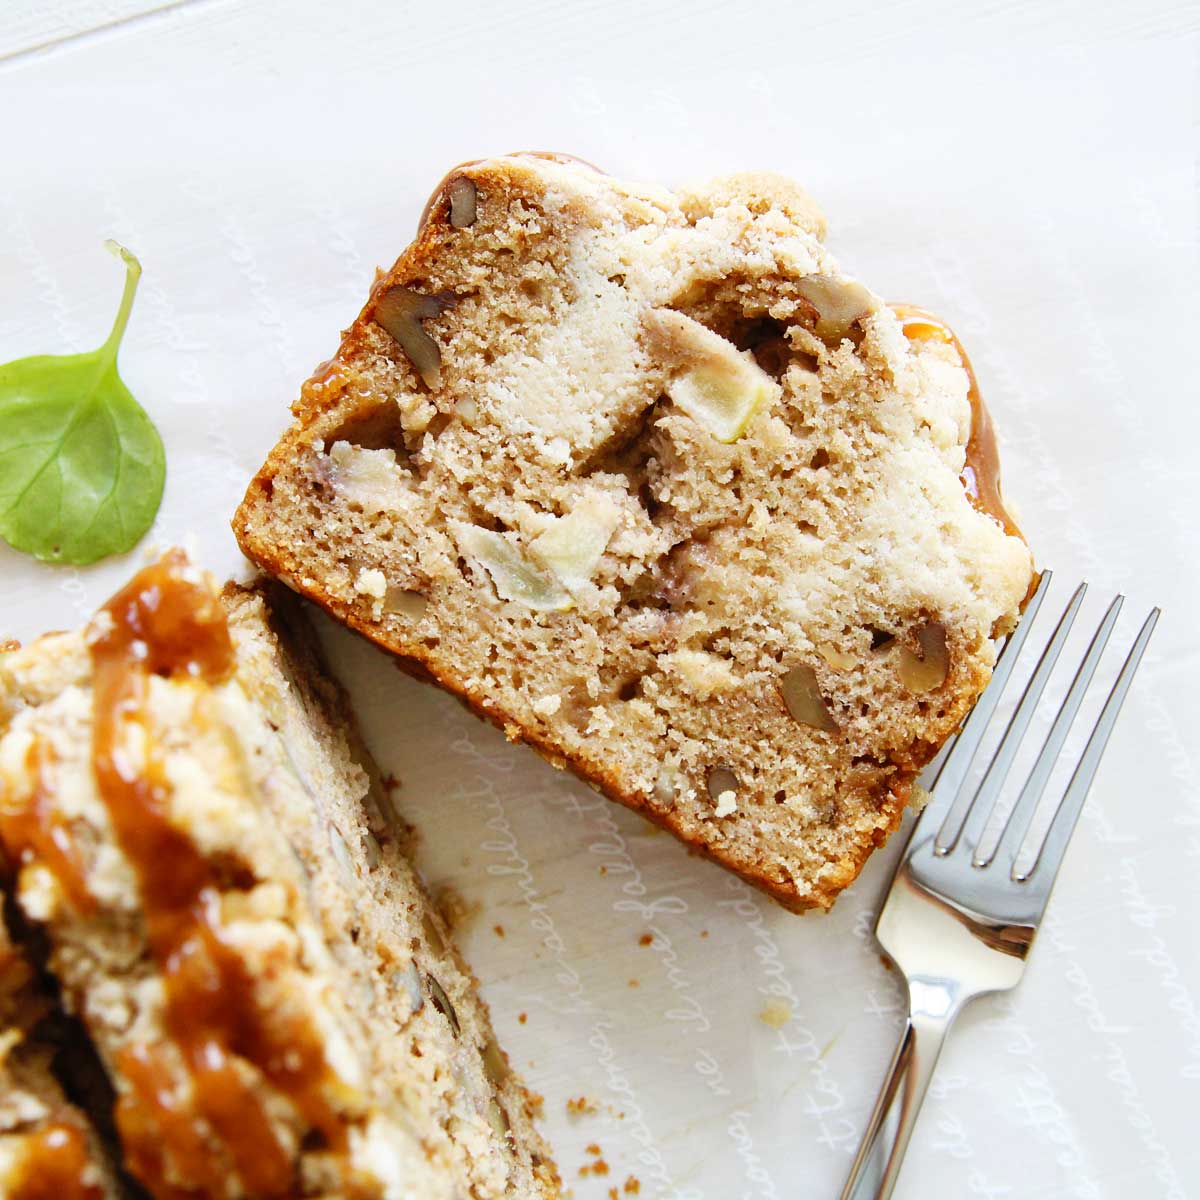 The Most Comforting Applesauce Banana Bread with Streusel Topping - Flourless Banana Roll Cake